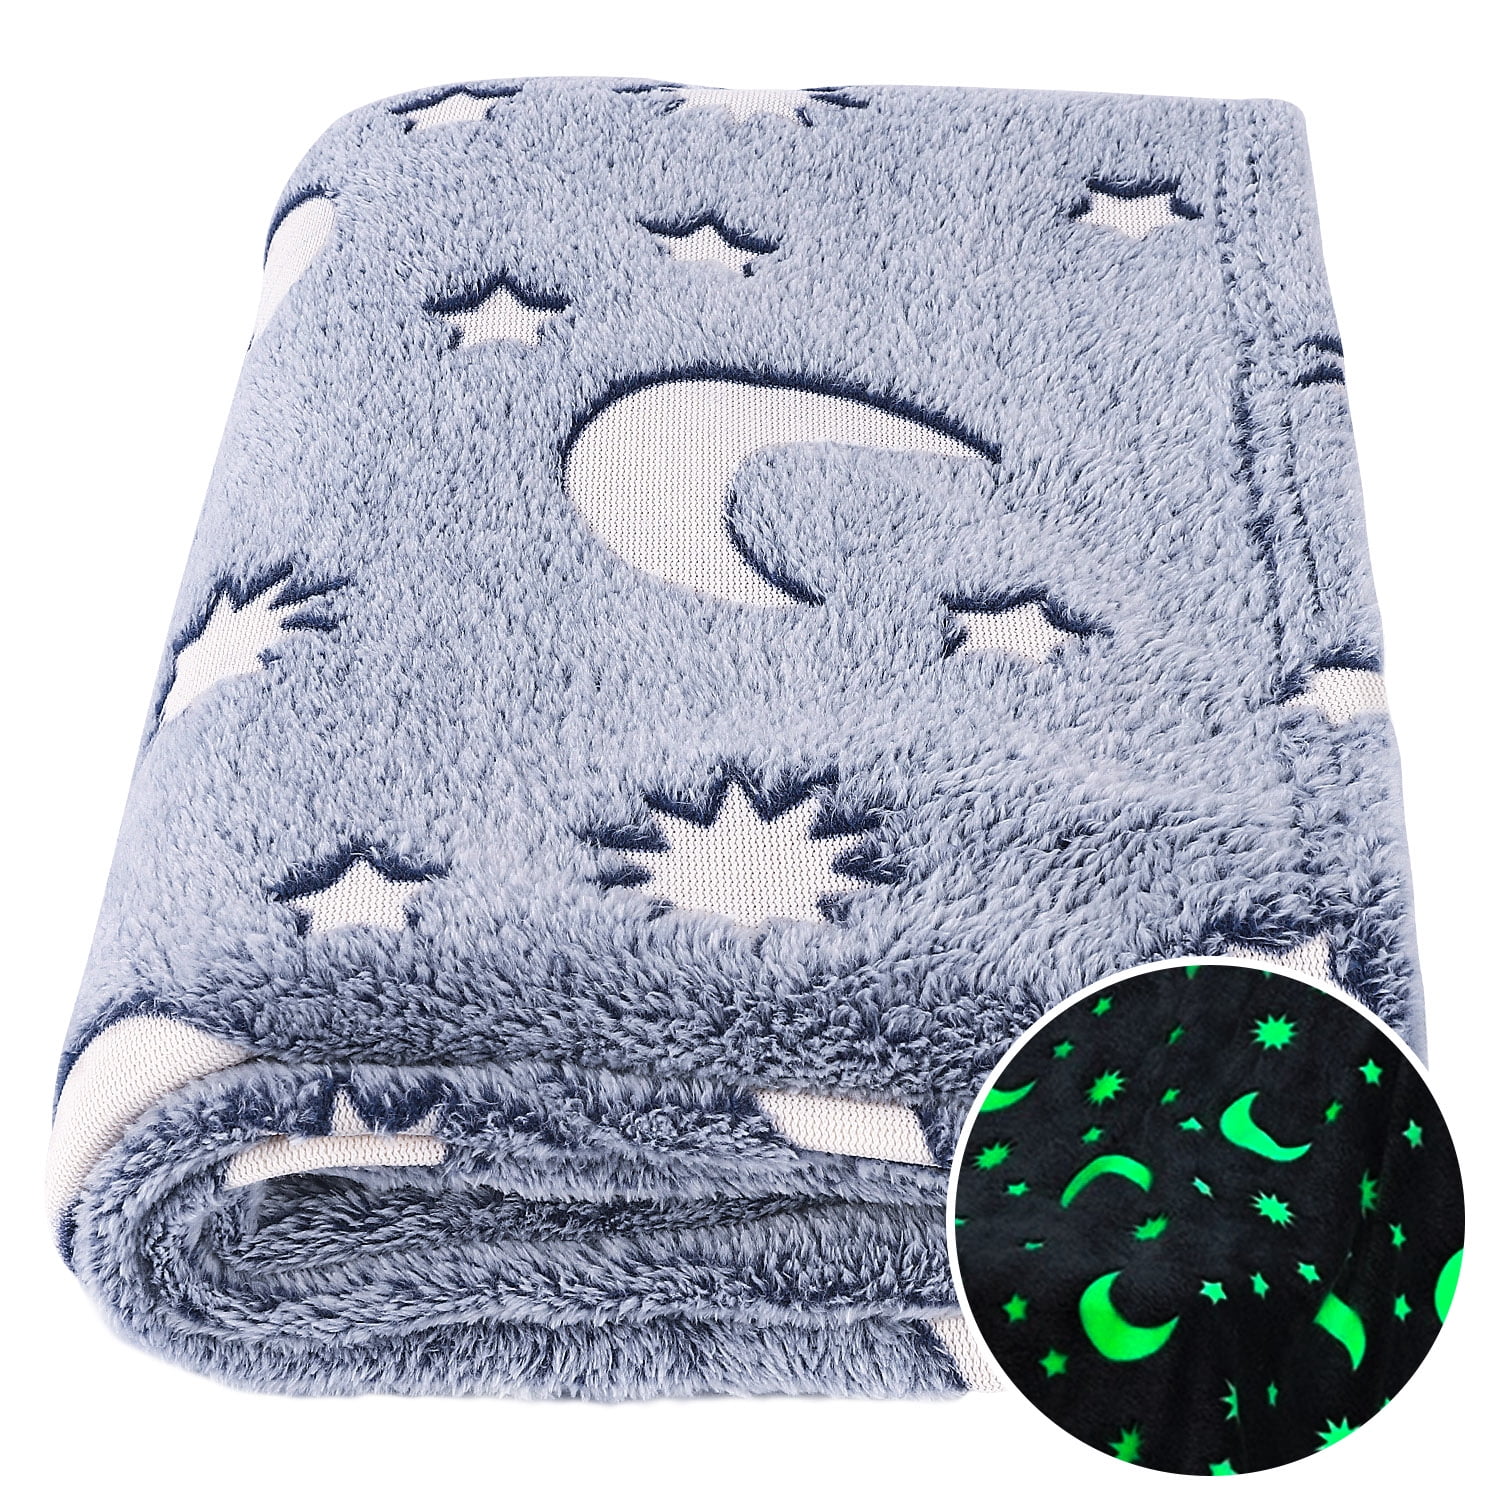 Akdeps Deep Star Night Fashion Blanket Super Soft Light Plush Bed Throw Blanket for Adults and Children to Use 50x60 